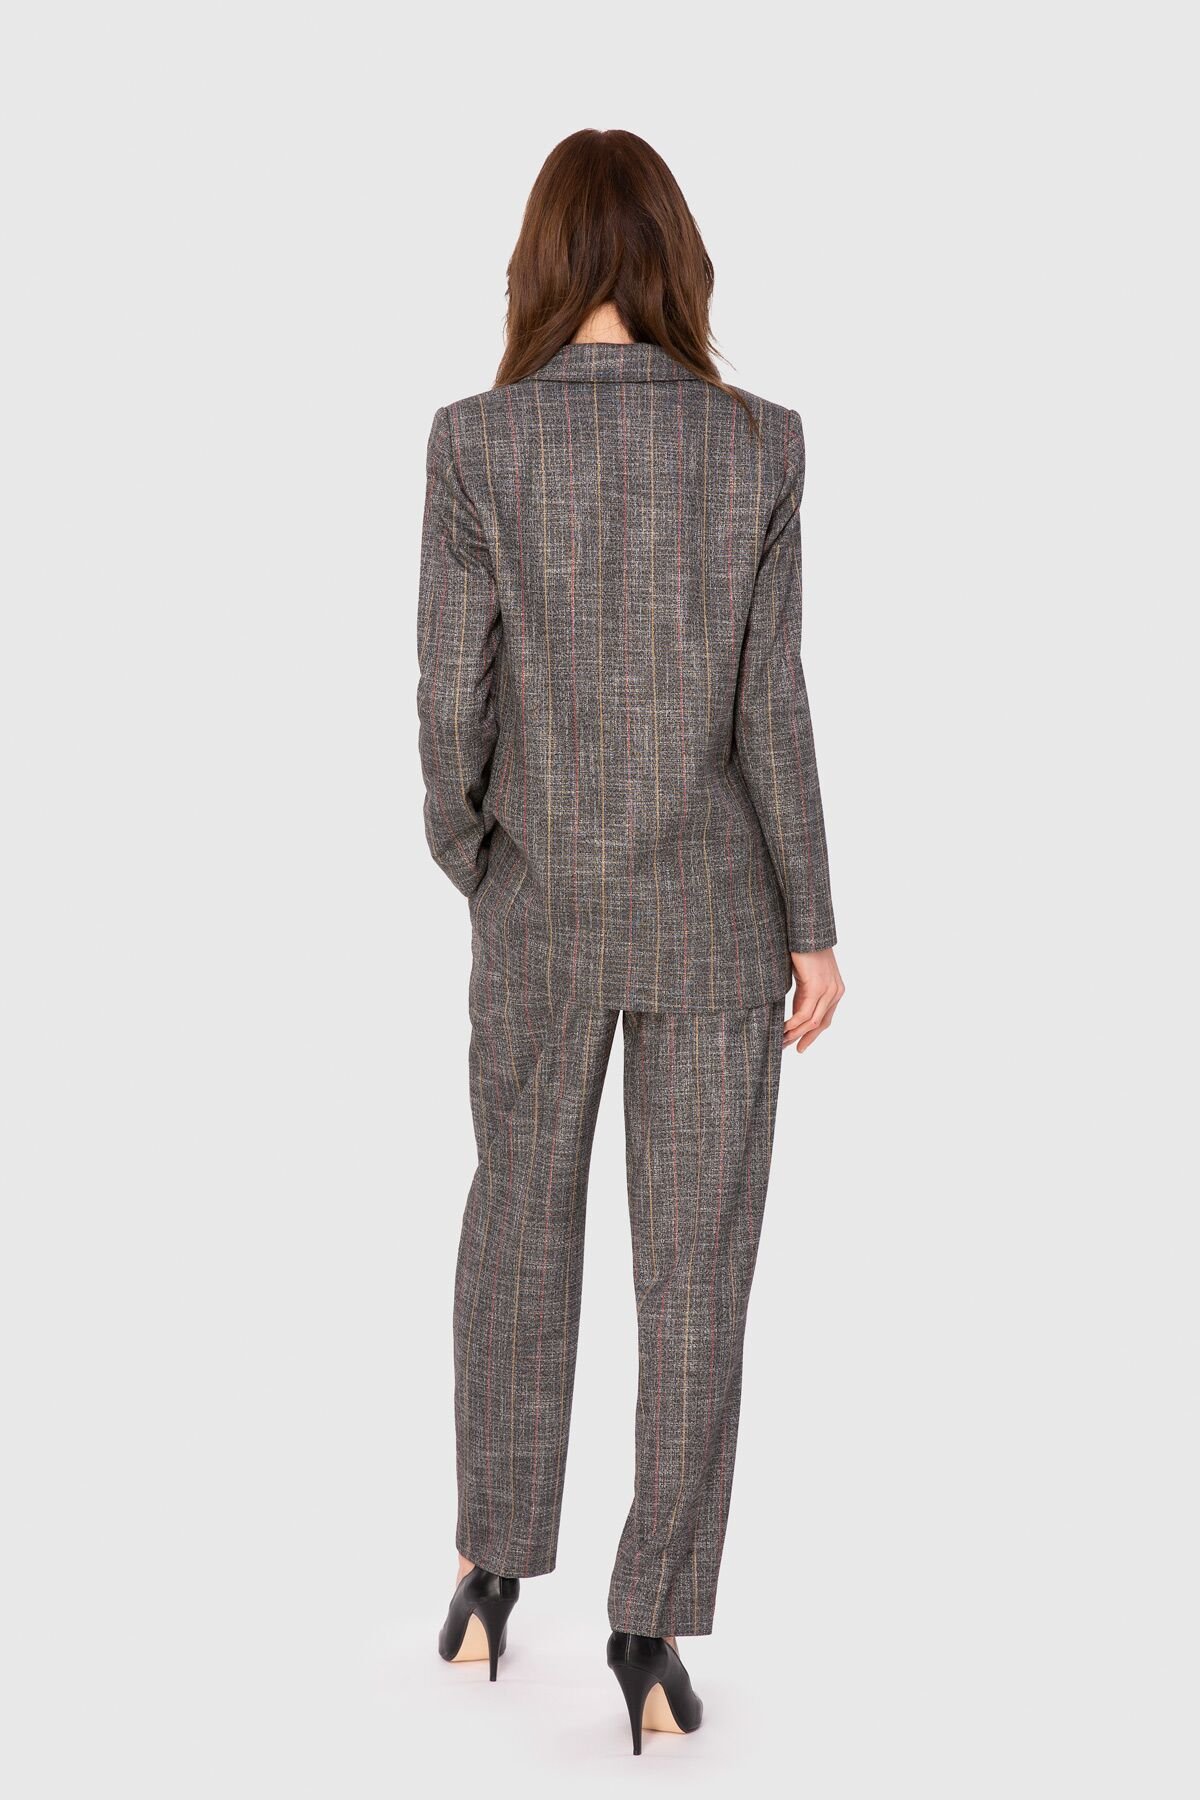  Textured Fabric Gray Suit